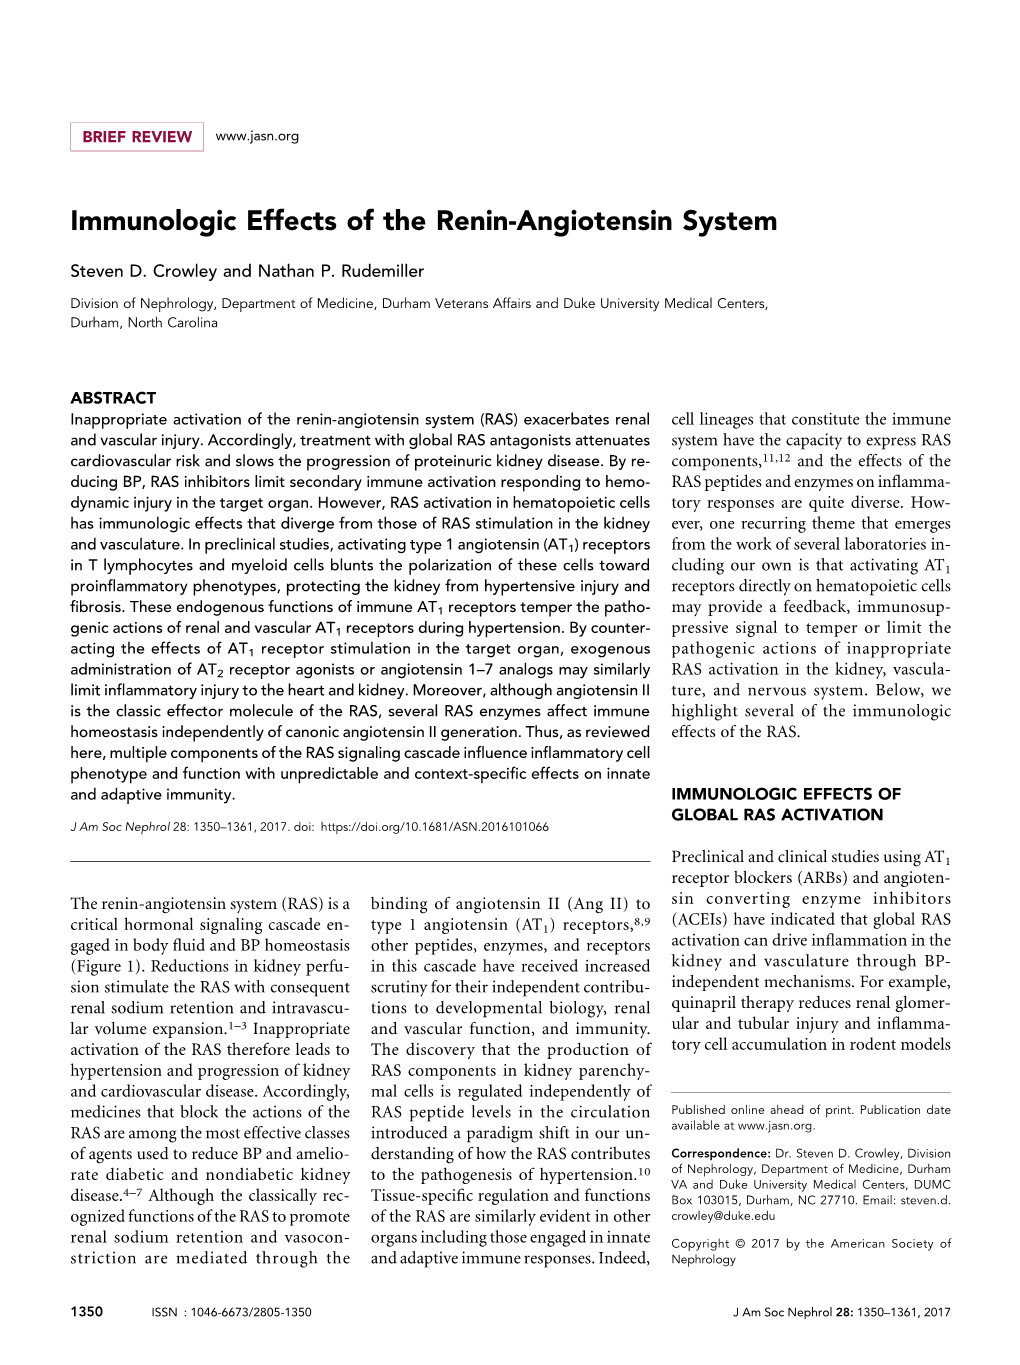 Immunologic Effects of the Renin-Angiotensin System